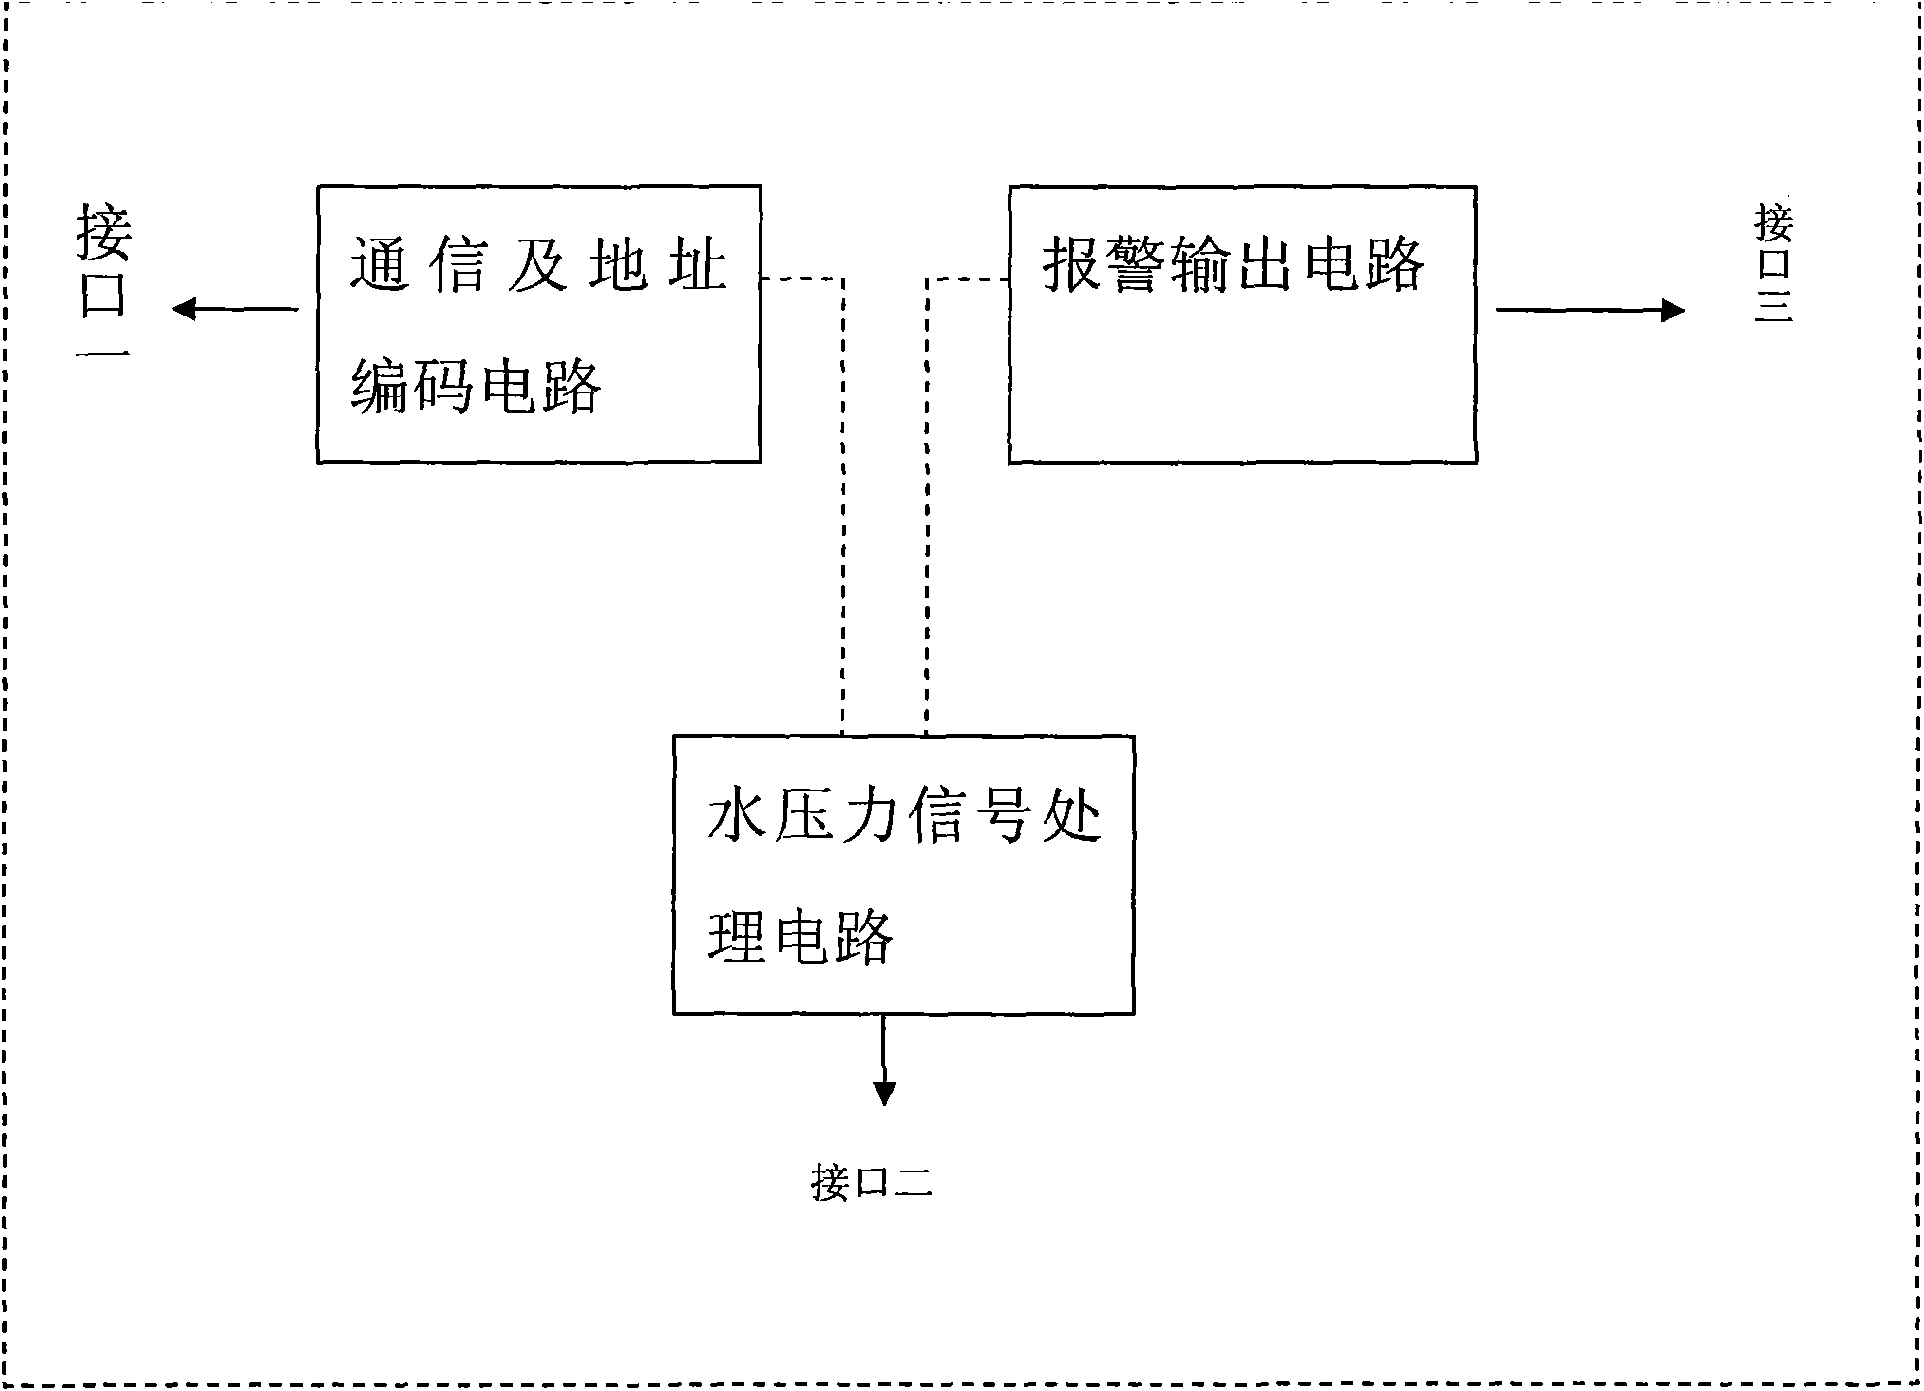 Detection alarm device for fire fighting hydraulic pressure